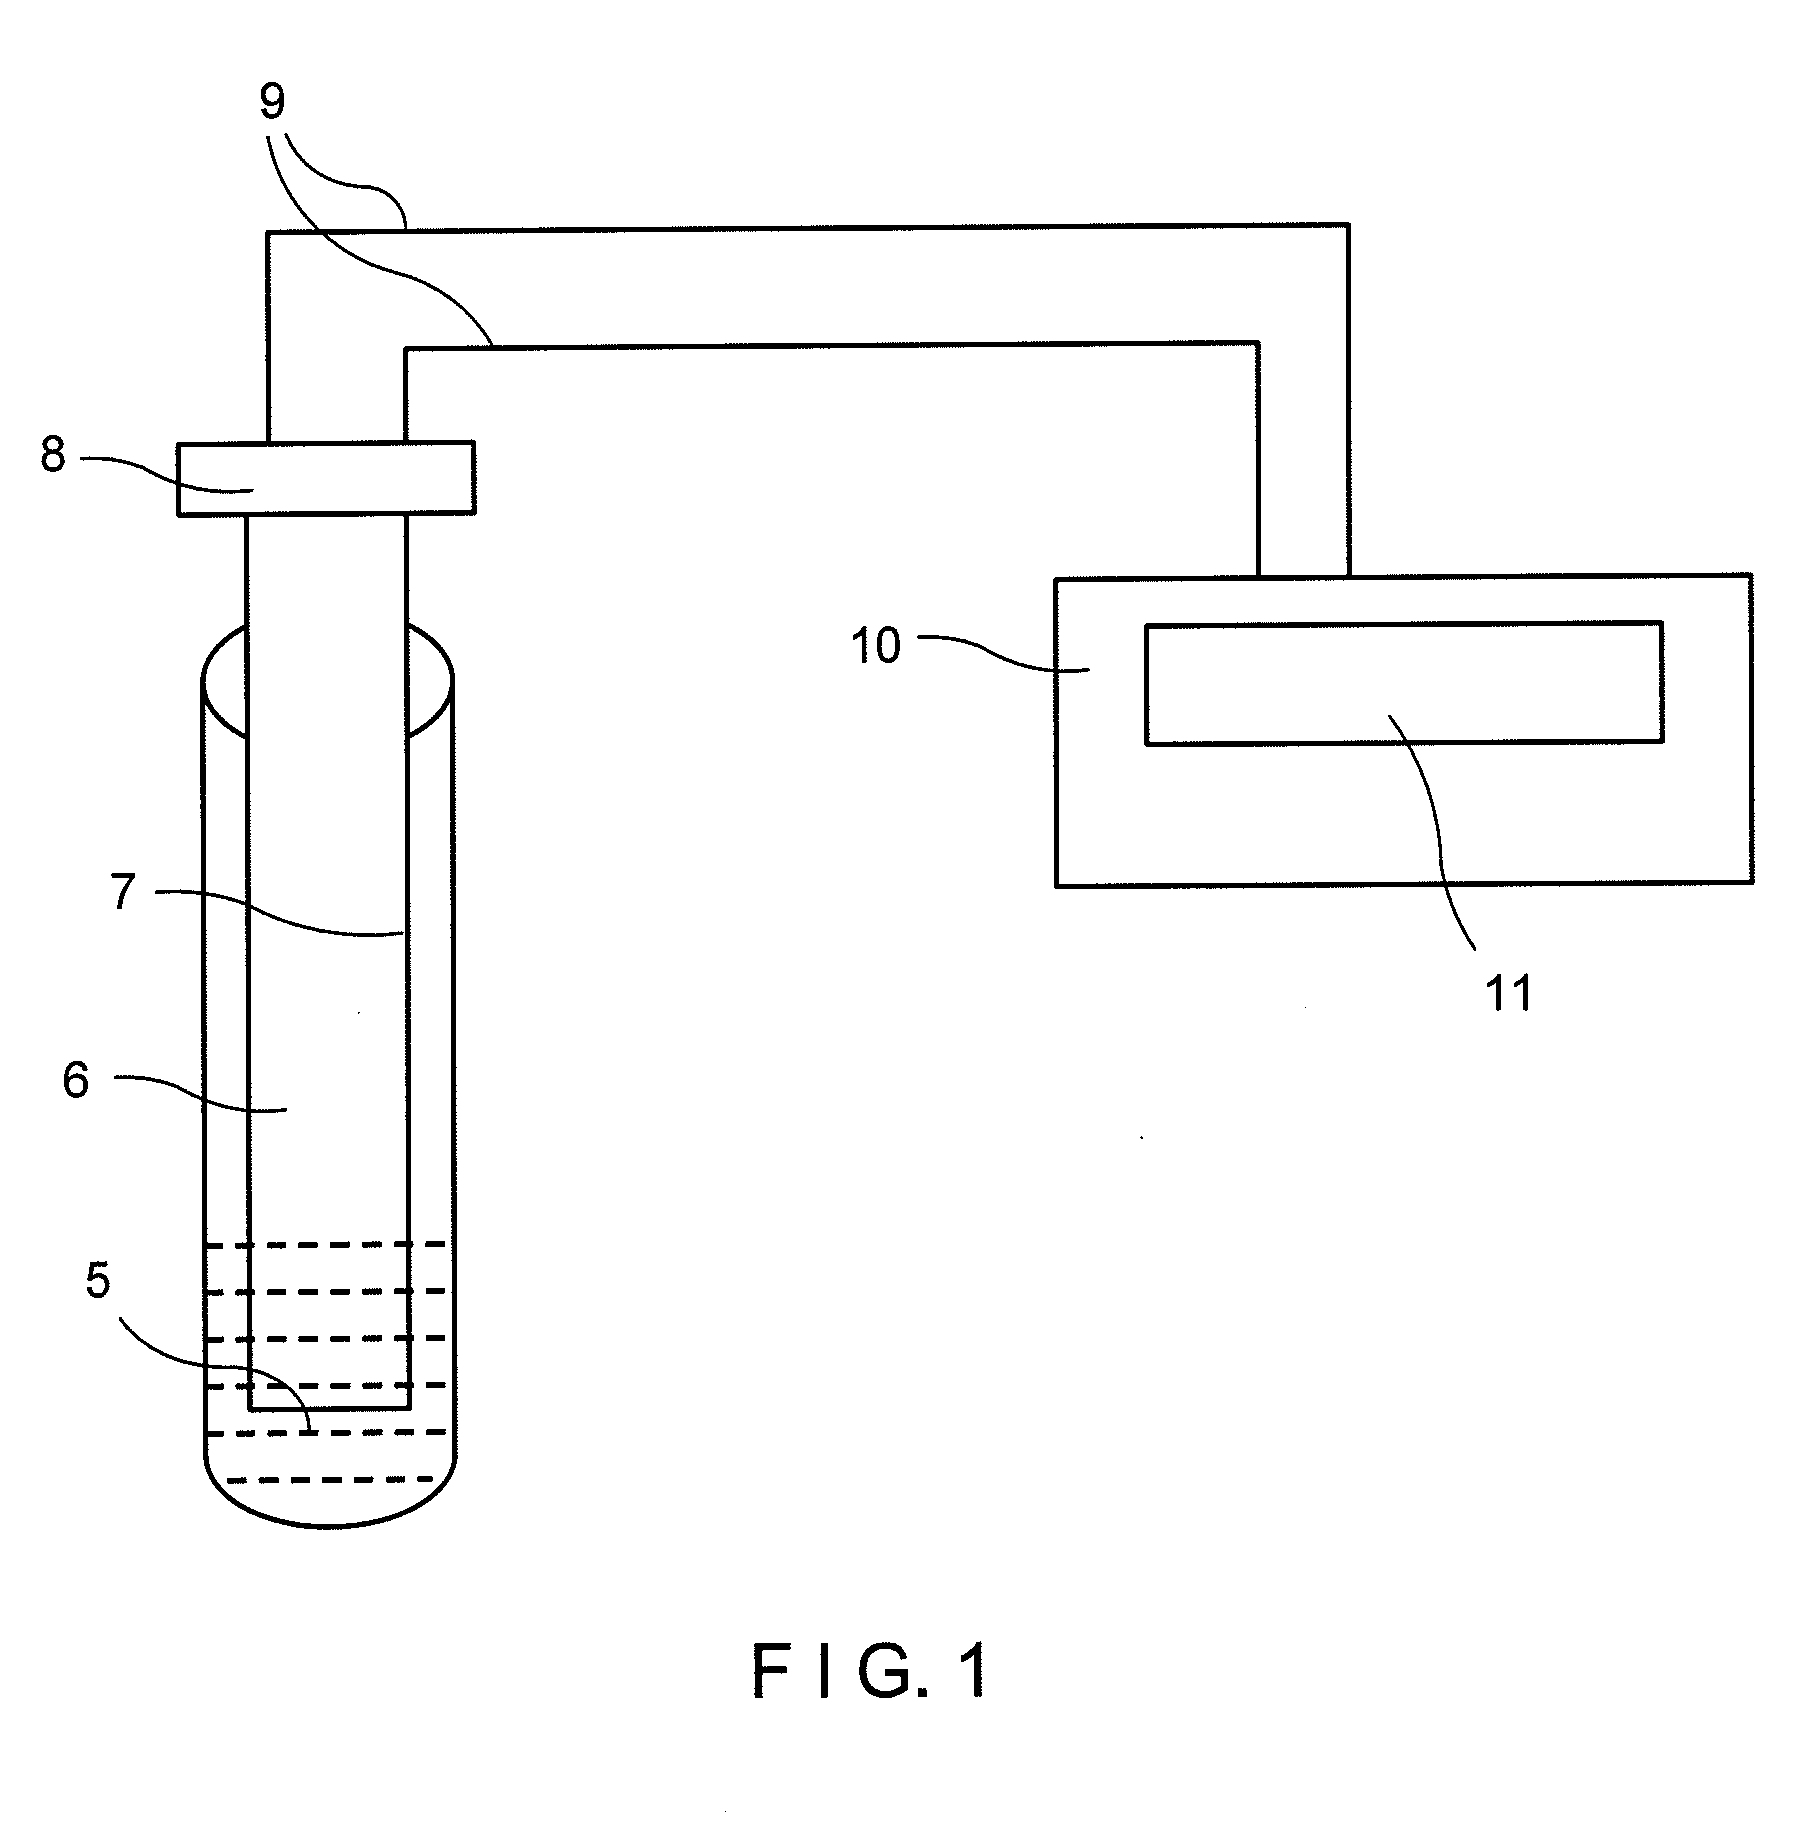 Non-enzymatic electrochemical method for simultaneous determination of total hemoglobin and glycated hemoglobin